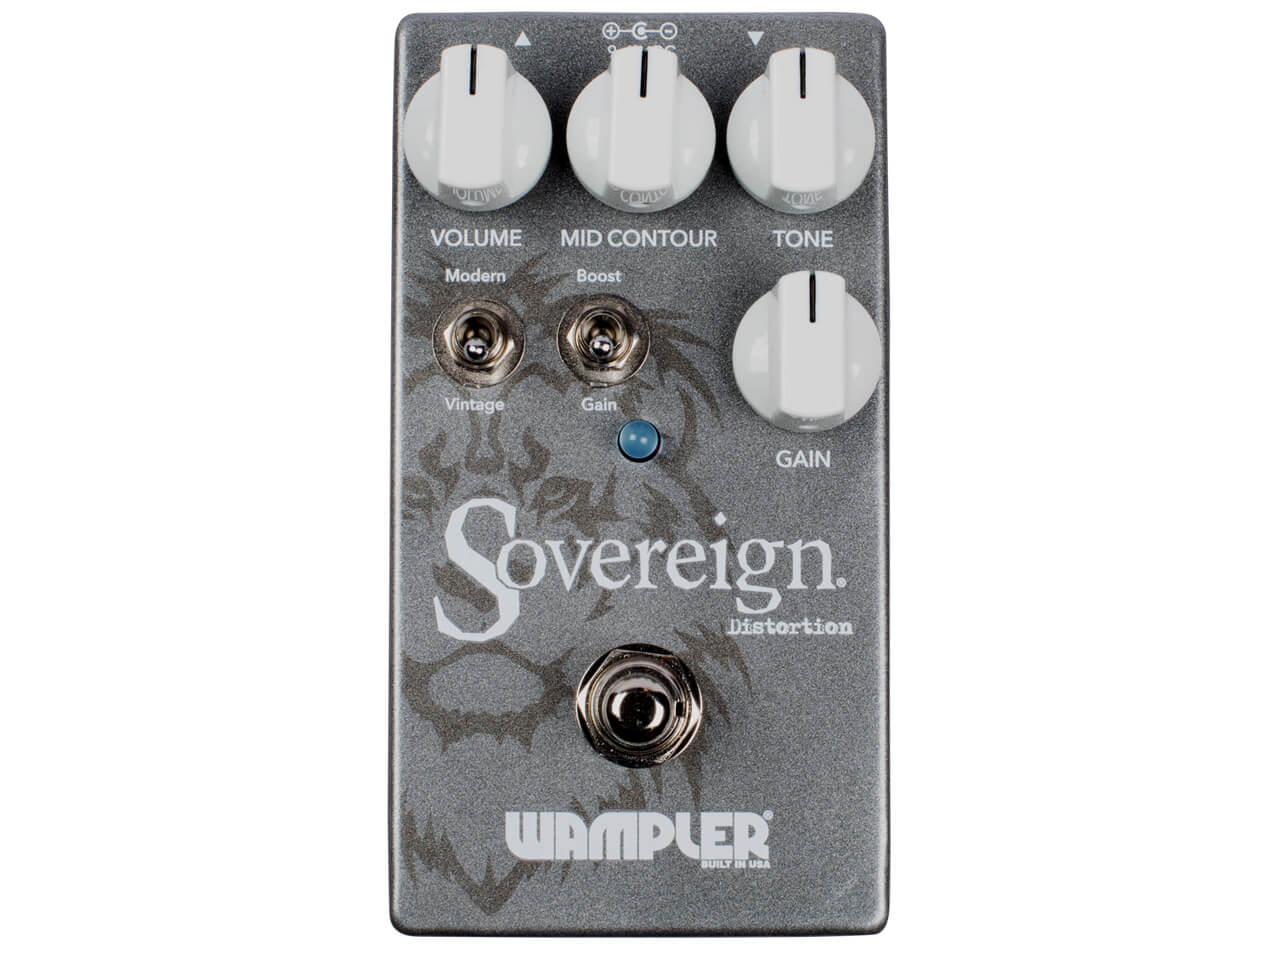 Wampler Pedals(ワンプラーペダル) Sovereign Distortion(ディストーション)